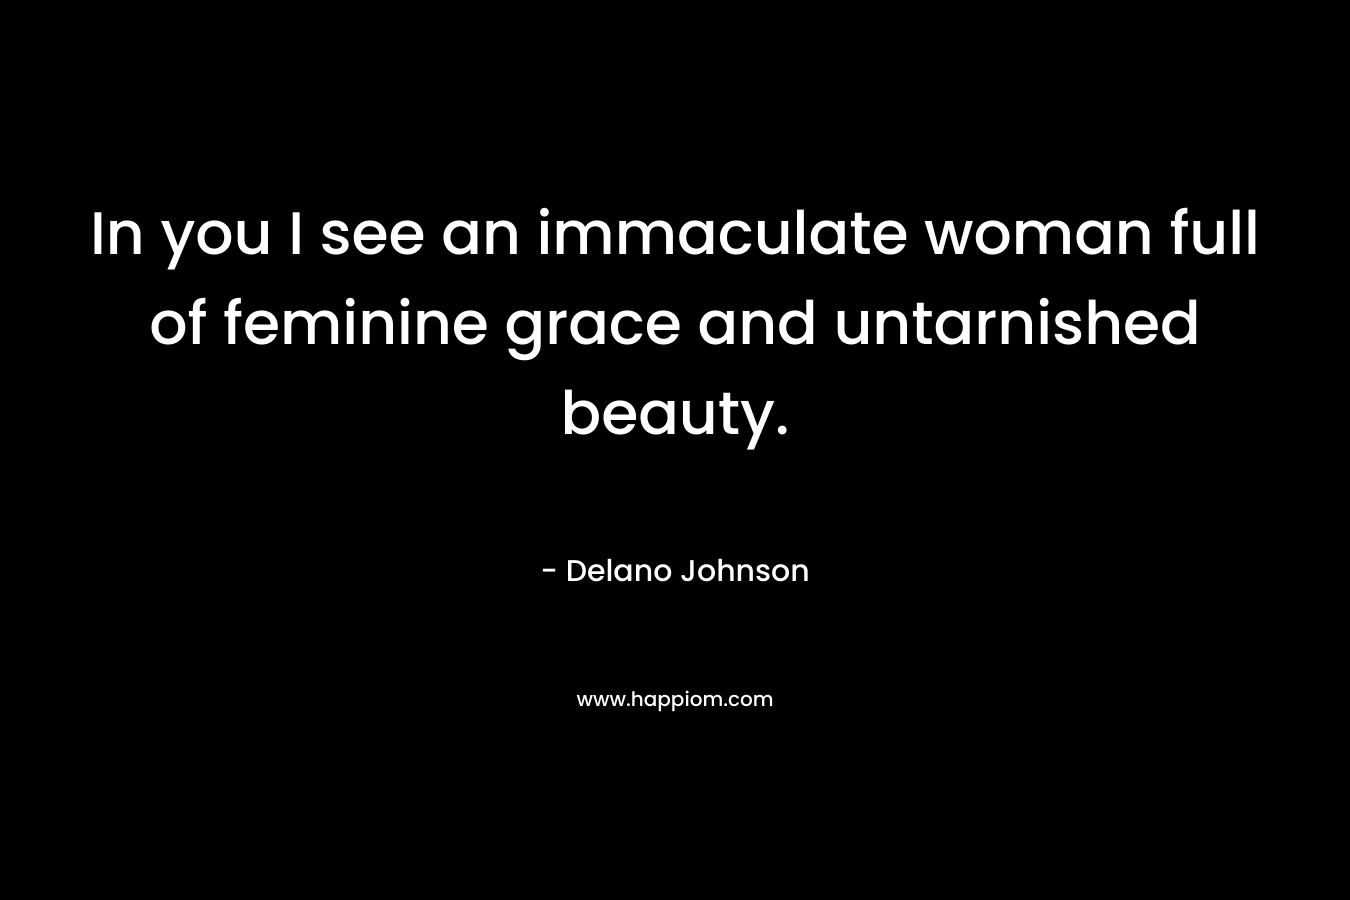 In you I see an immaculate woman full of feminine grace and untarnished beauty.